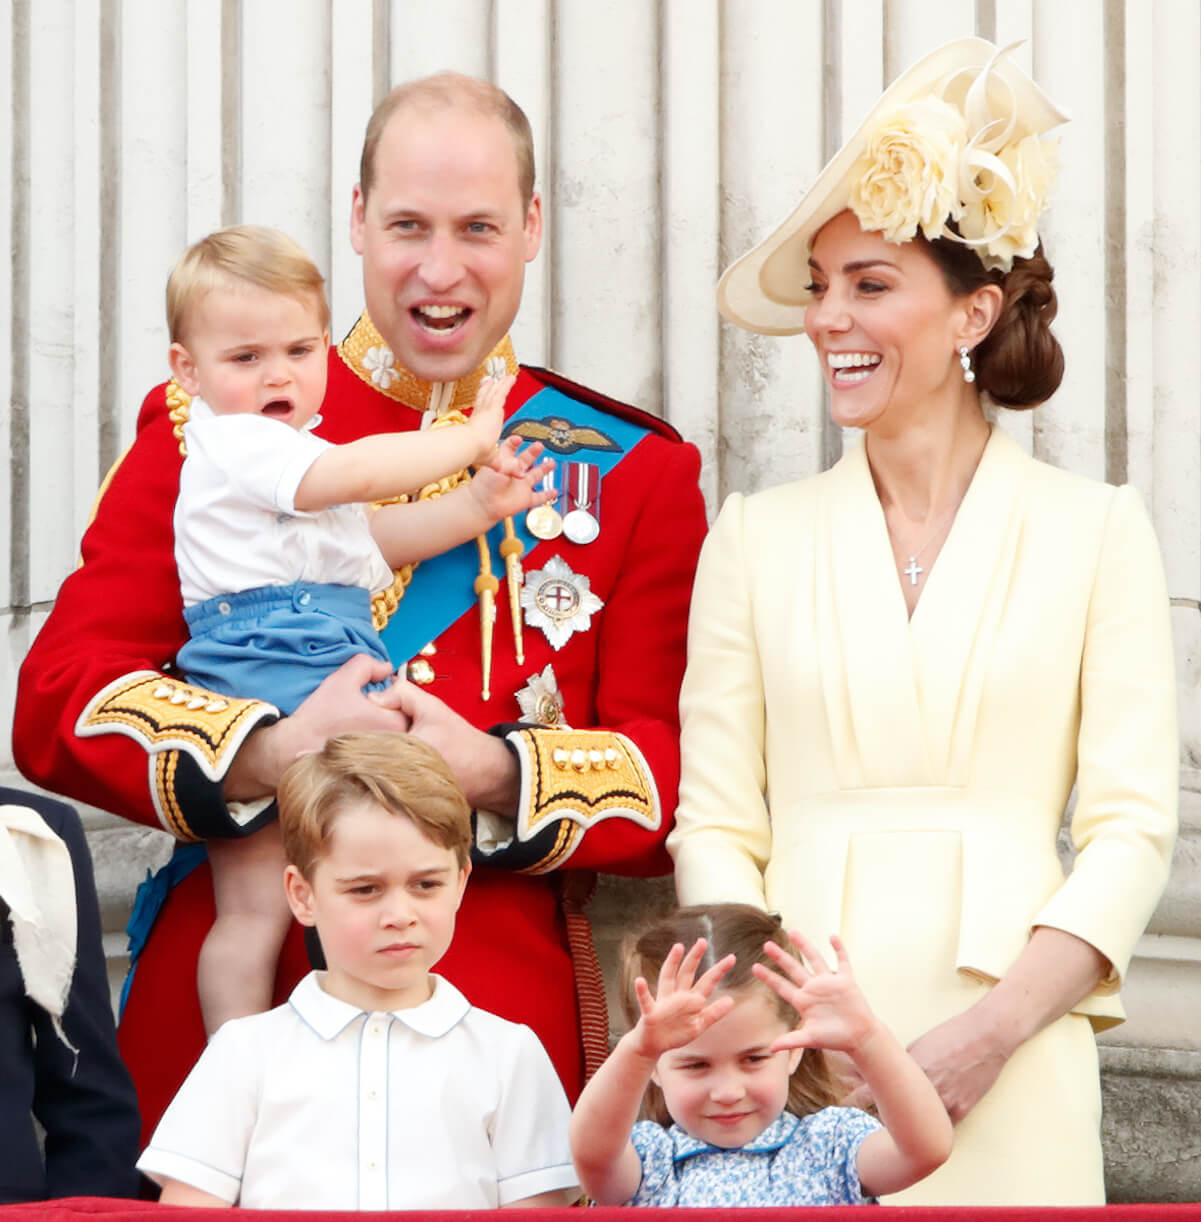 Prince William and Kate Middleton with their three kids, Prince George, Princess Charlotte, and Prince Louis